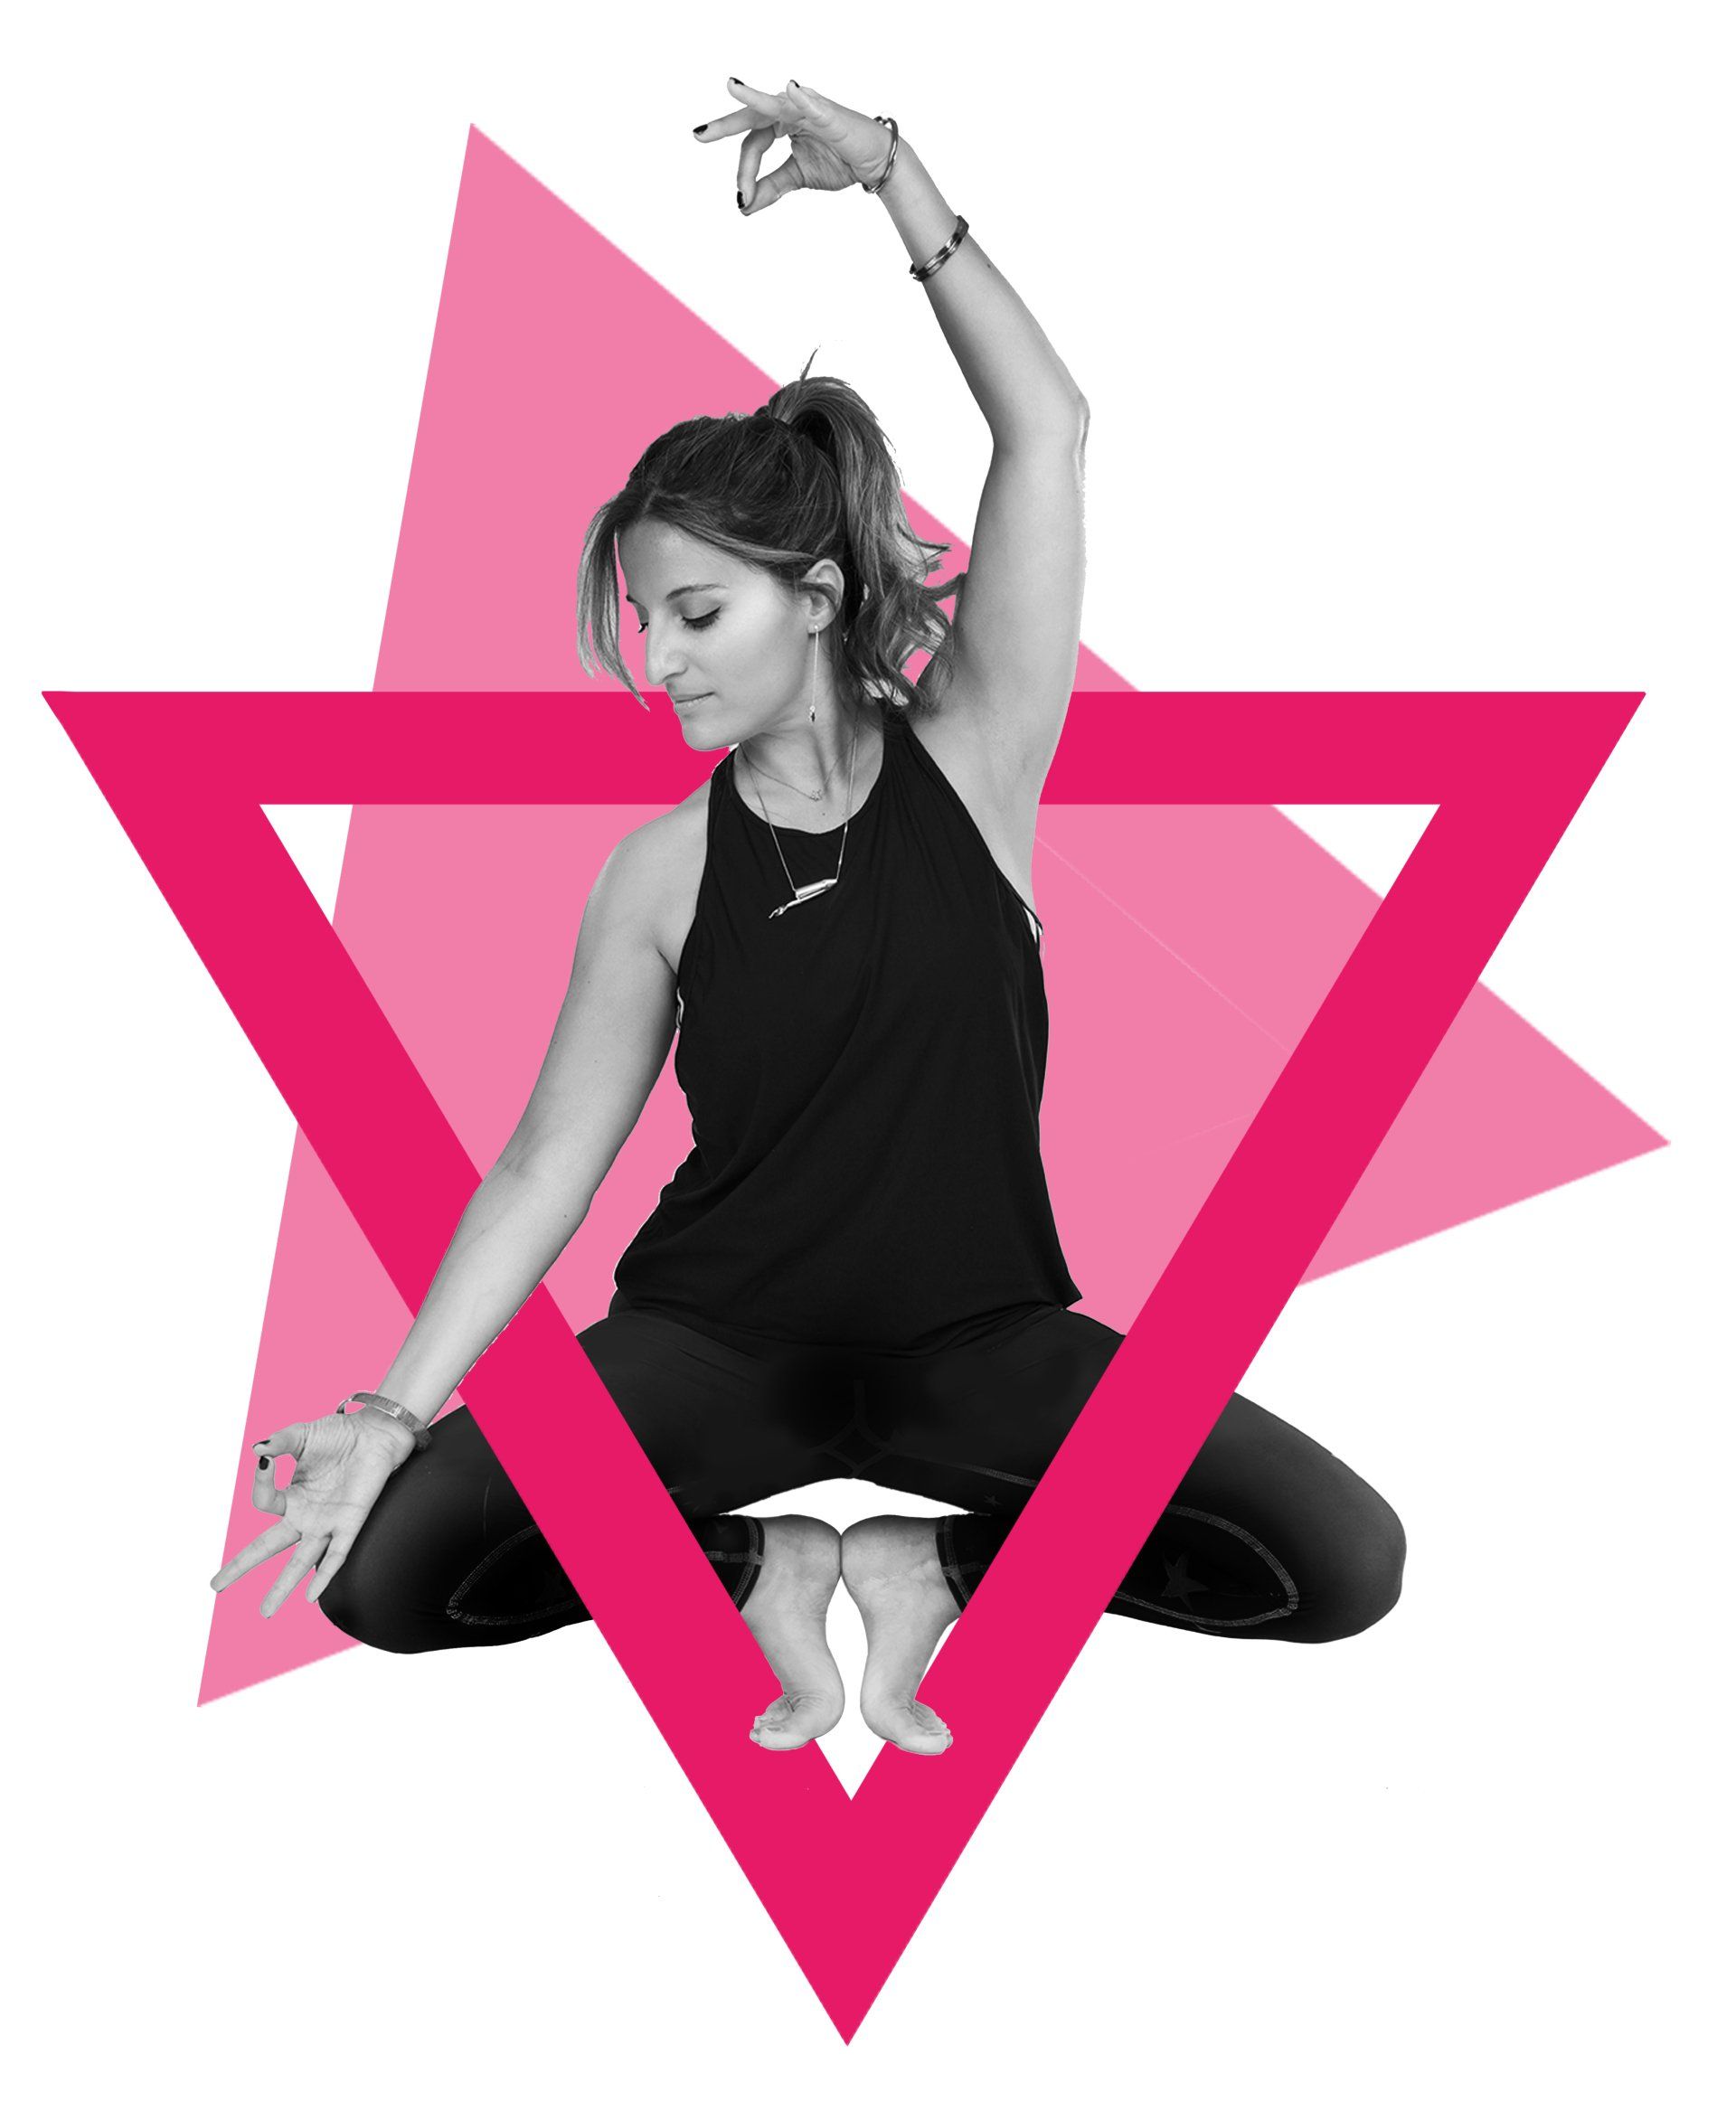 Flamingo Yoga Maya is your wellbeing concierge - online private 1:1 classes, to find your purpose and your 'WHY', build strength and flexibility.
Unique yoga clothing with built-in towelling to wipe away sweat at you workout.